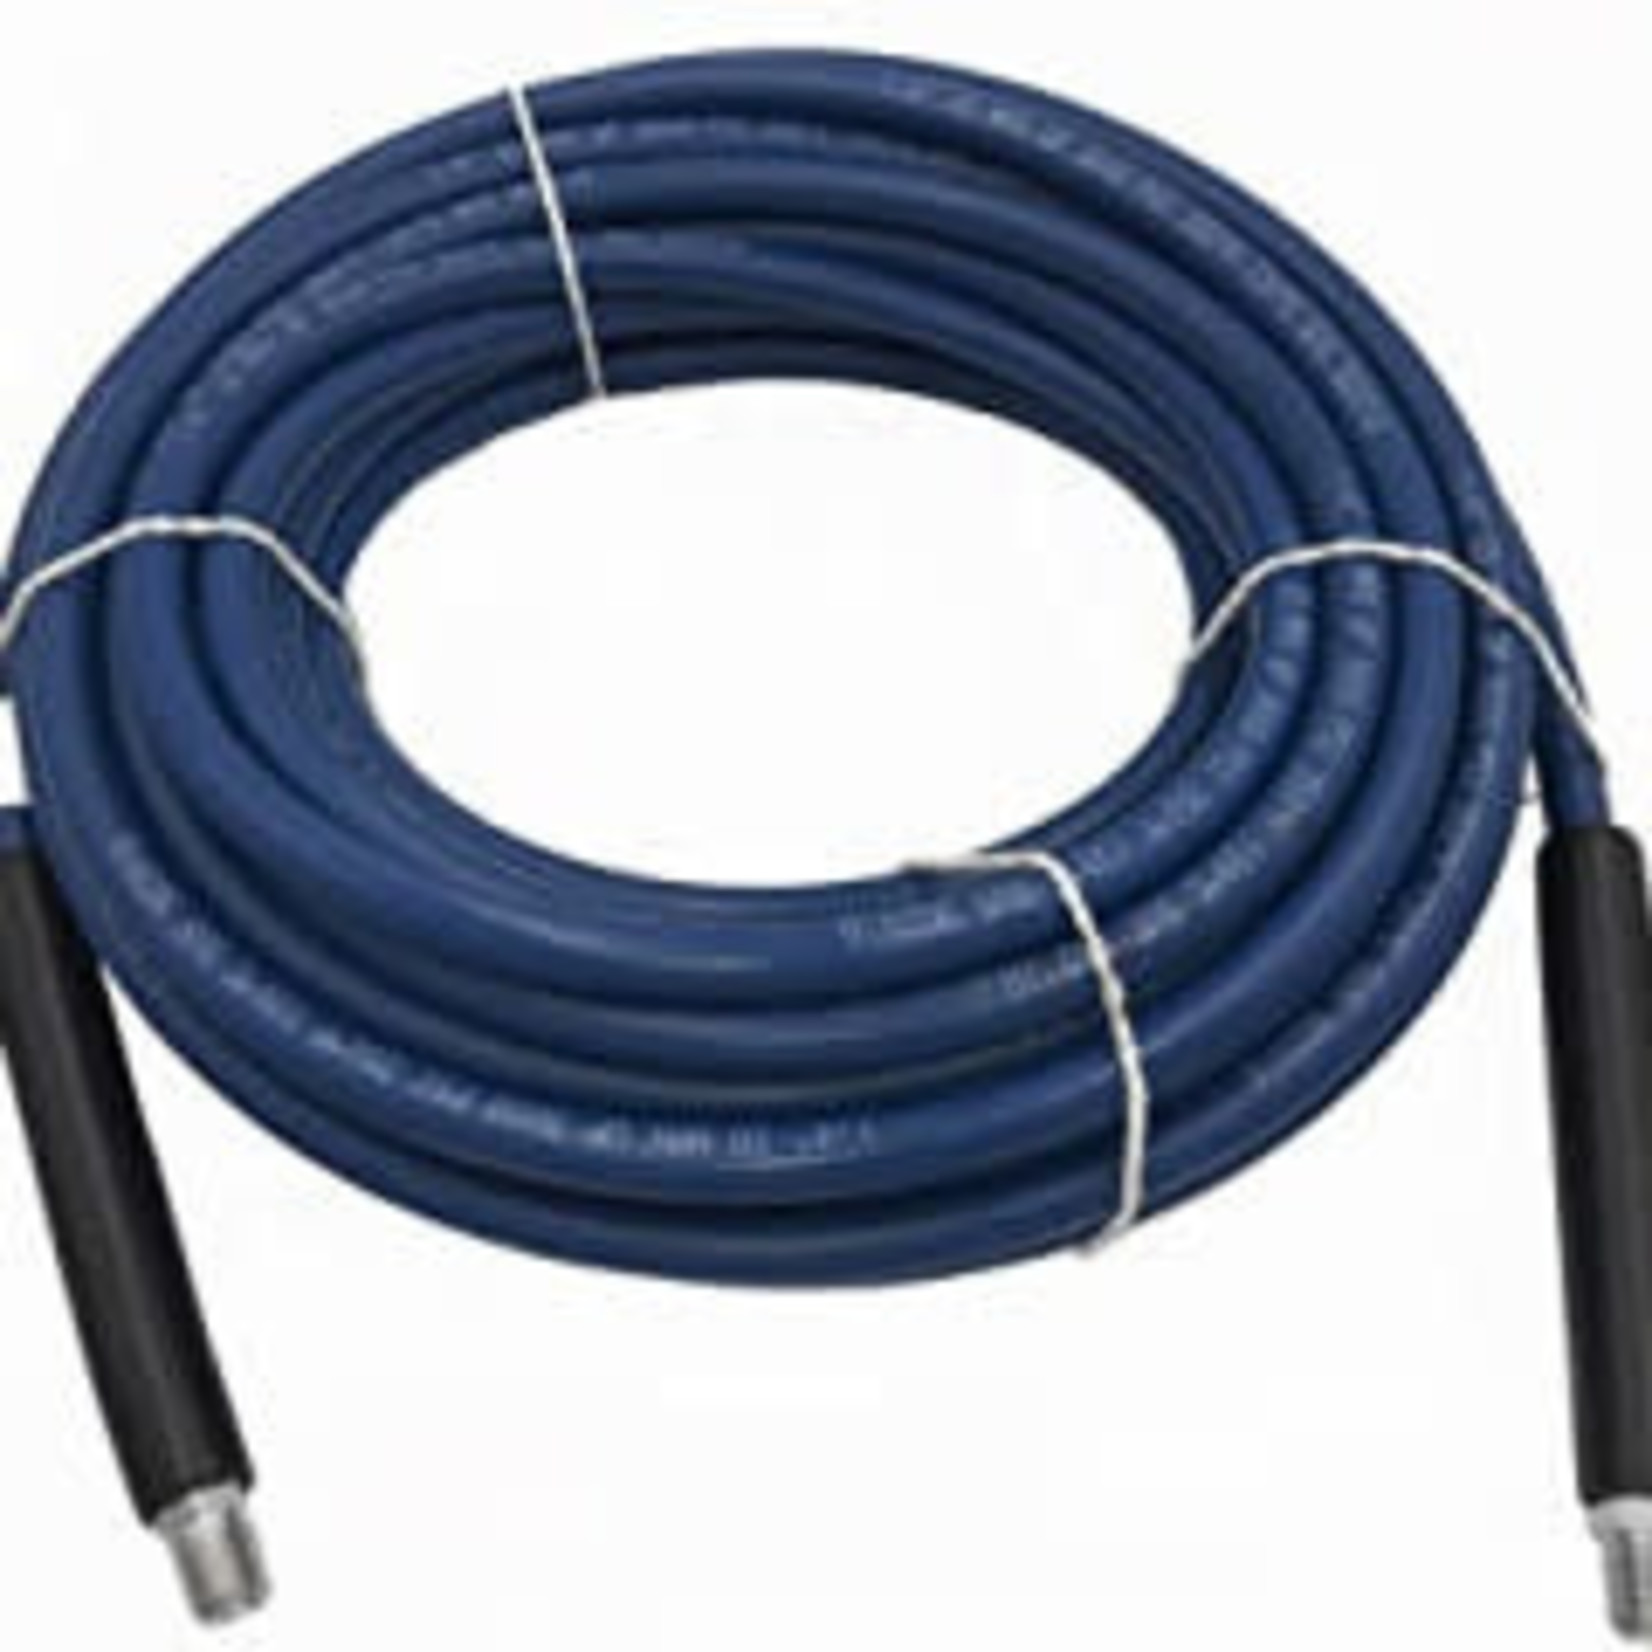 Dry It Center High Temp Carpet Cleaning Solution Hose : Size:1/4" x 25'